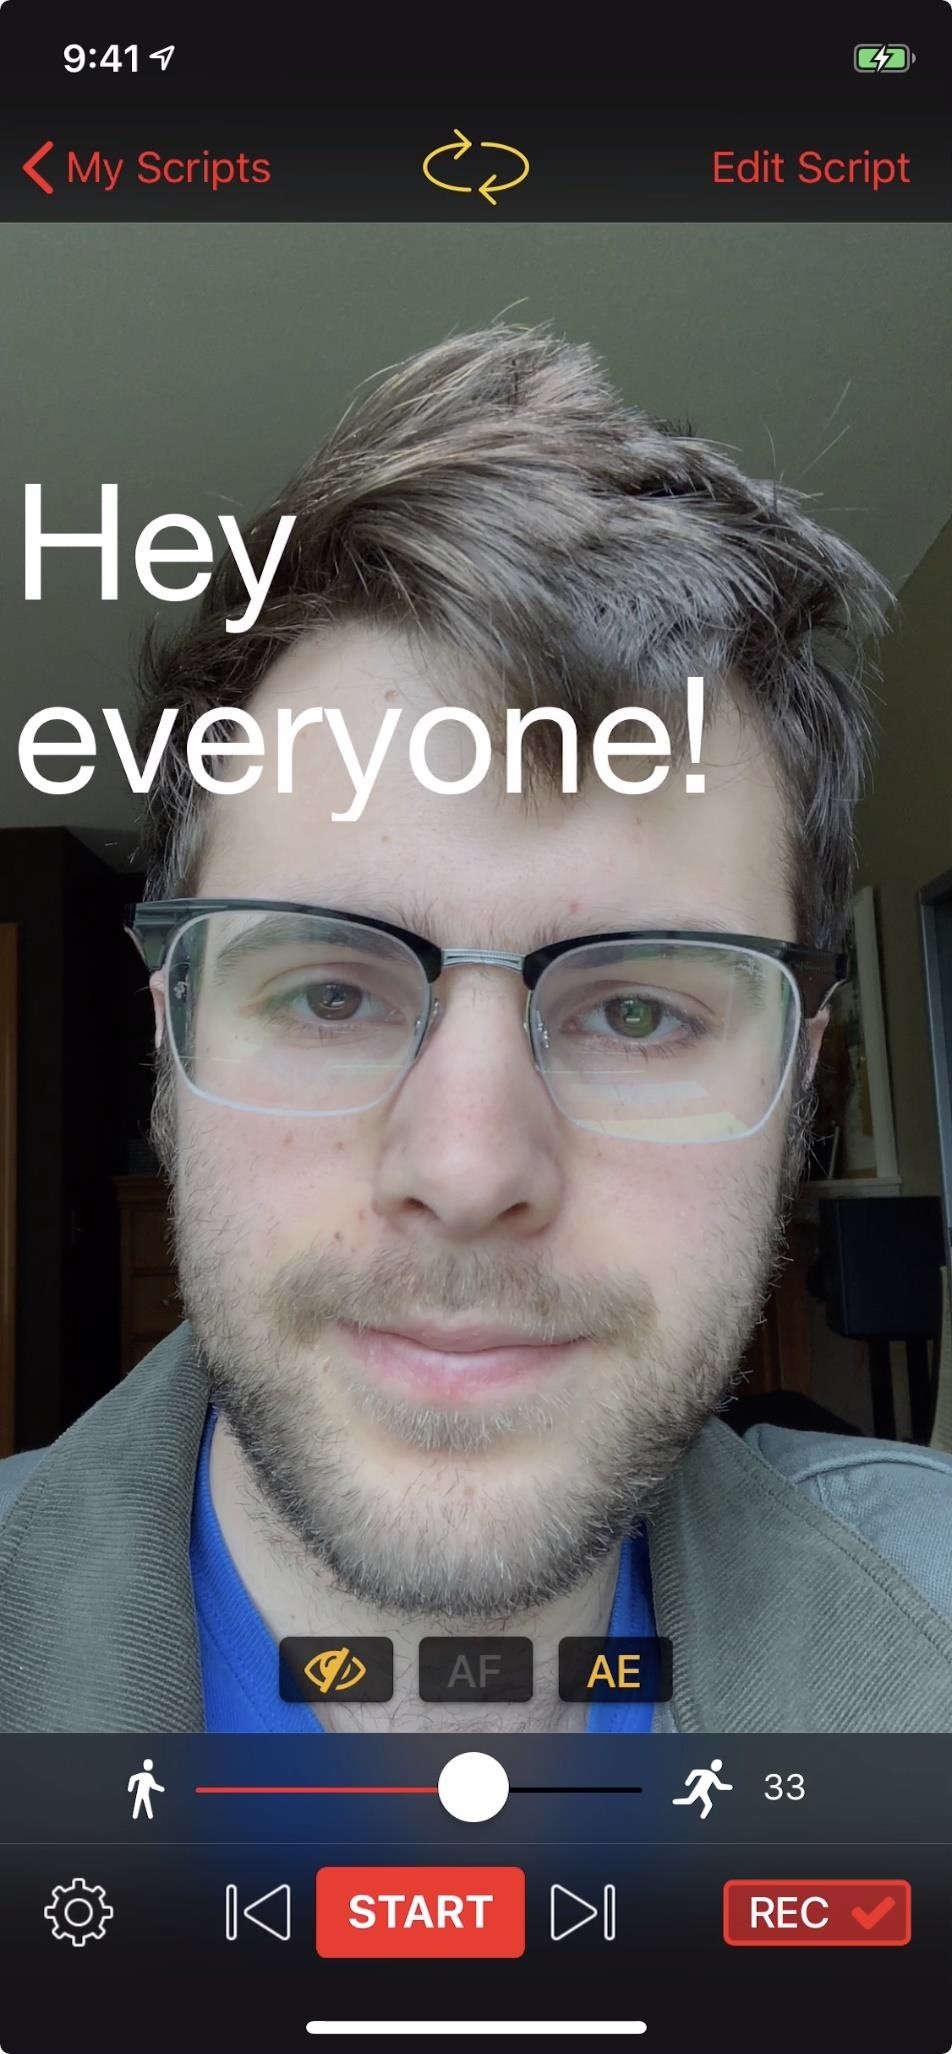 Turn Your Phone into a Teleprompter to Record Selfie Videos Without Breaking Eye Contact